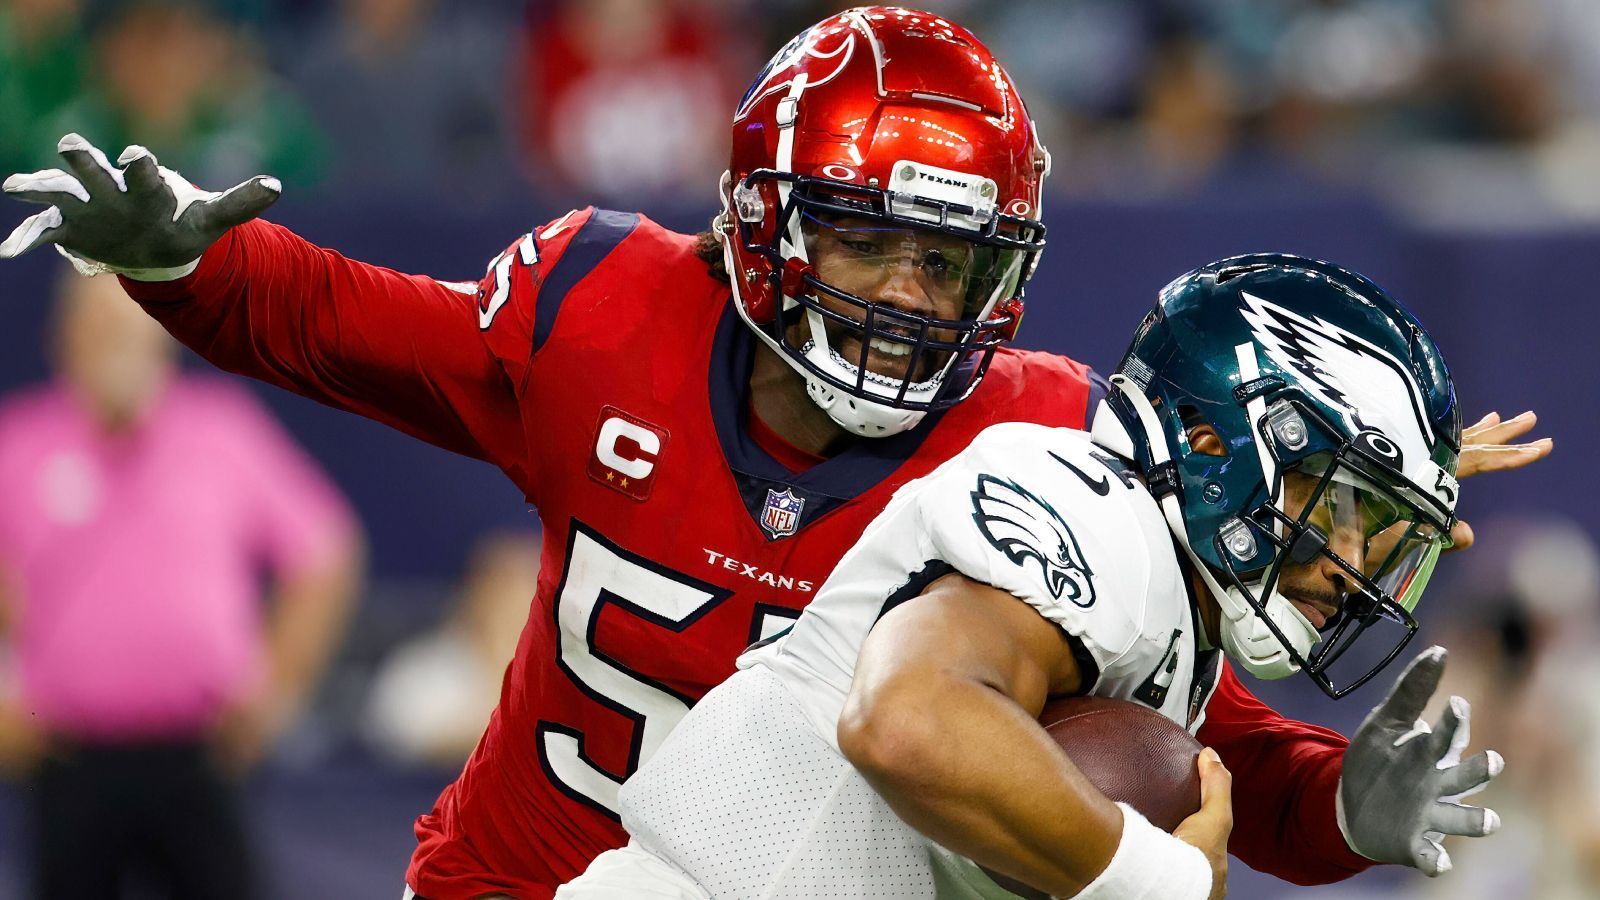 
                <strong>Jerry Hughes (Houston Texans)</strong><br>
                Statistiken von Jerry Hughes im Vergleich zu Khalil Mack (Los Angeles Chargers):&#x2022; Sacks: 8 - 7<br>&#x2022; Tackles for Loss: 9 - 9<br>&#x2022; Forcierte Turnover: 2 - 2<br>
              